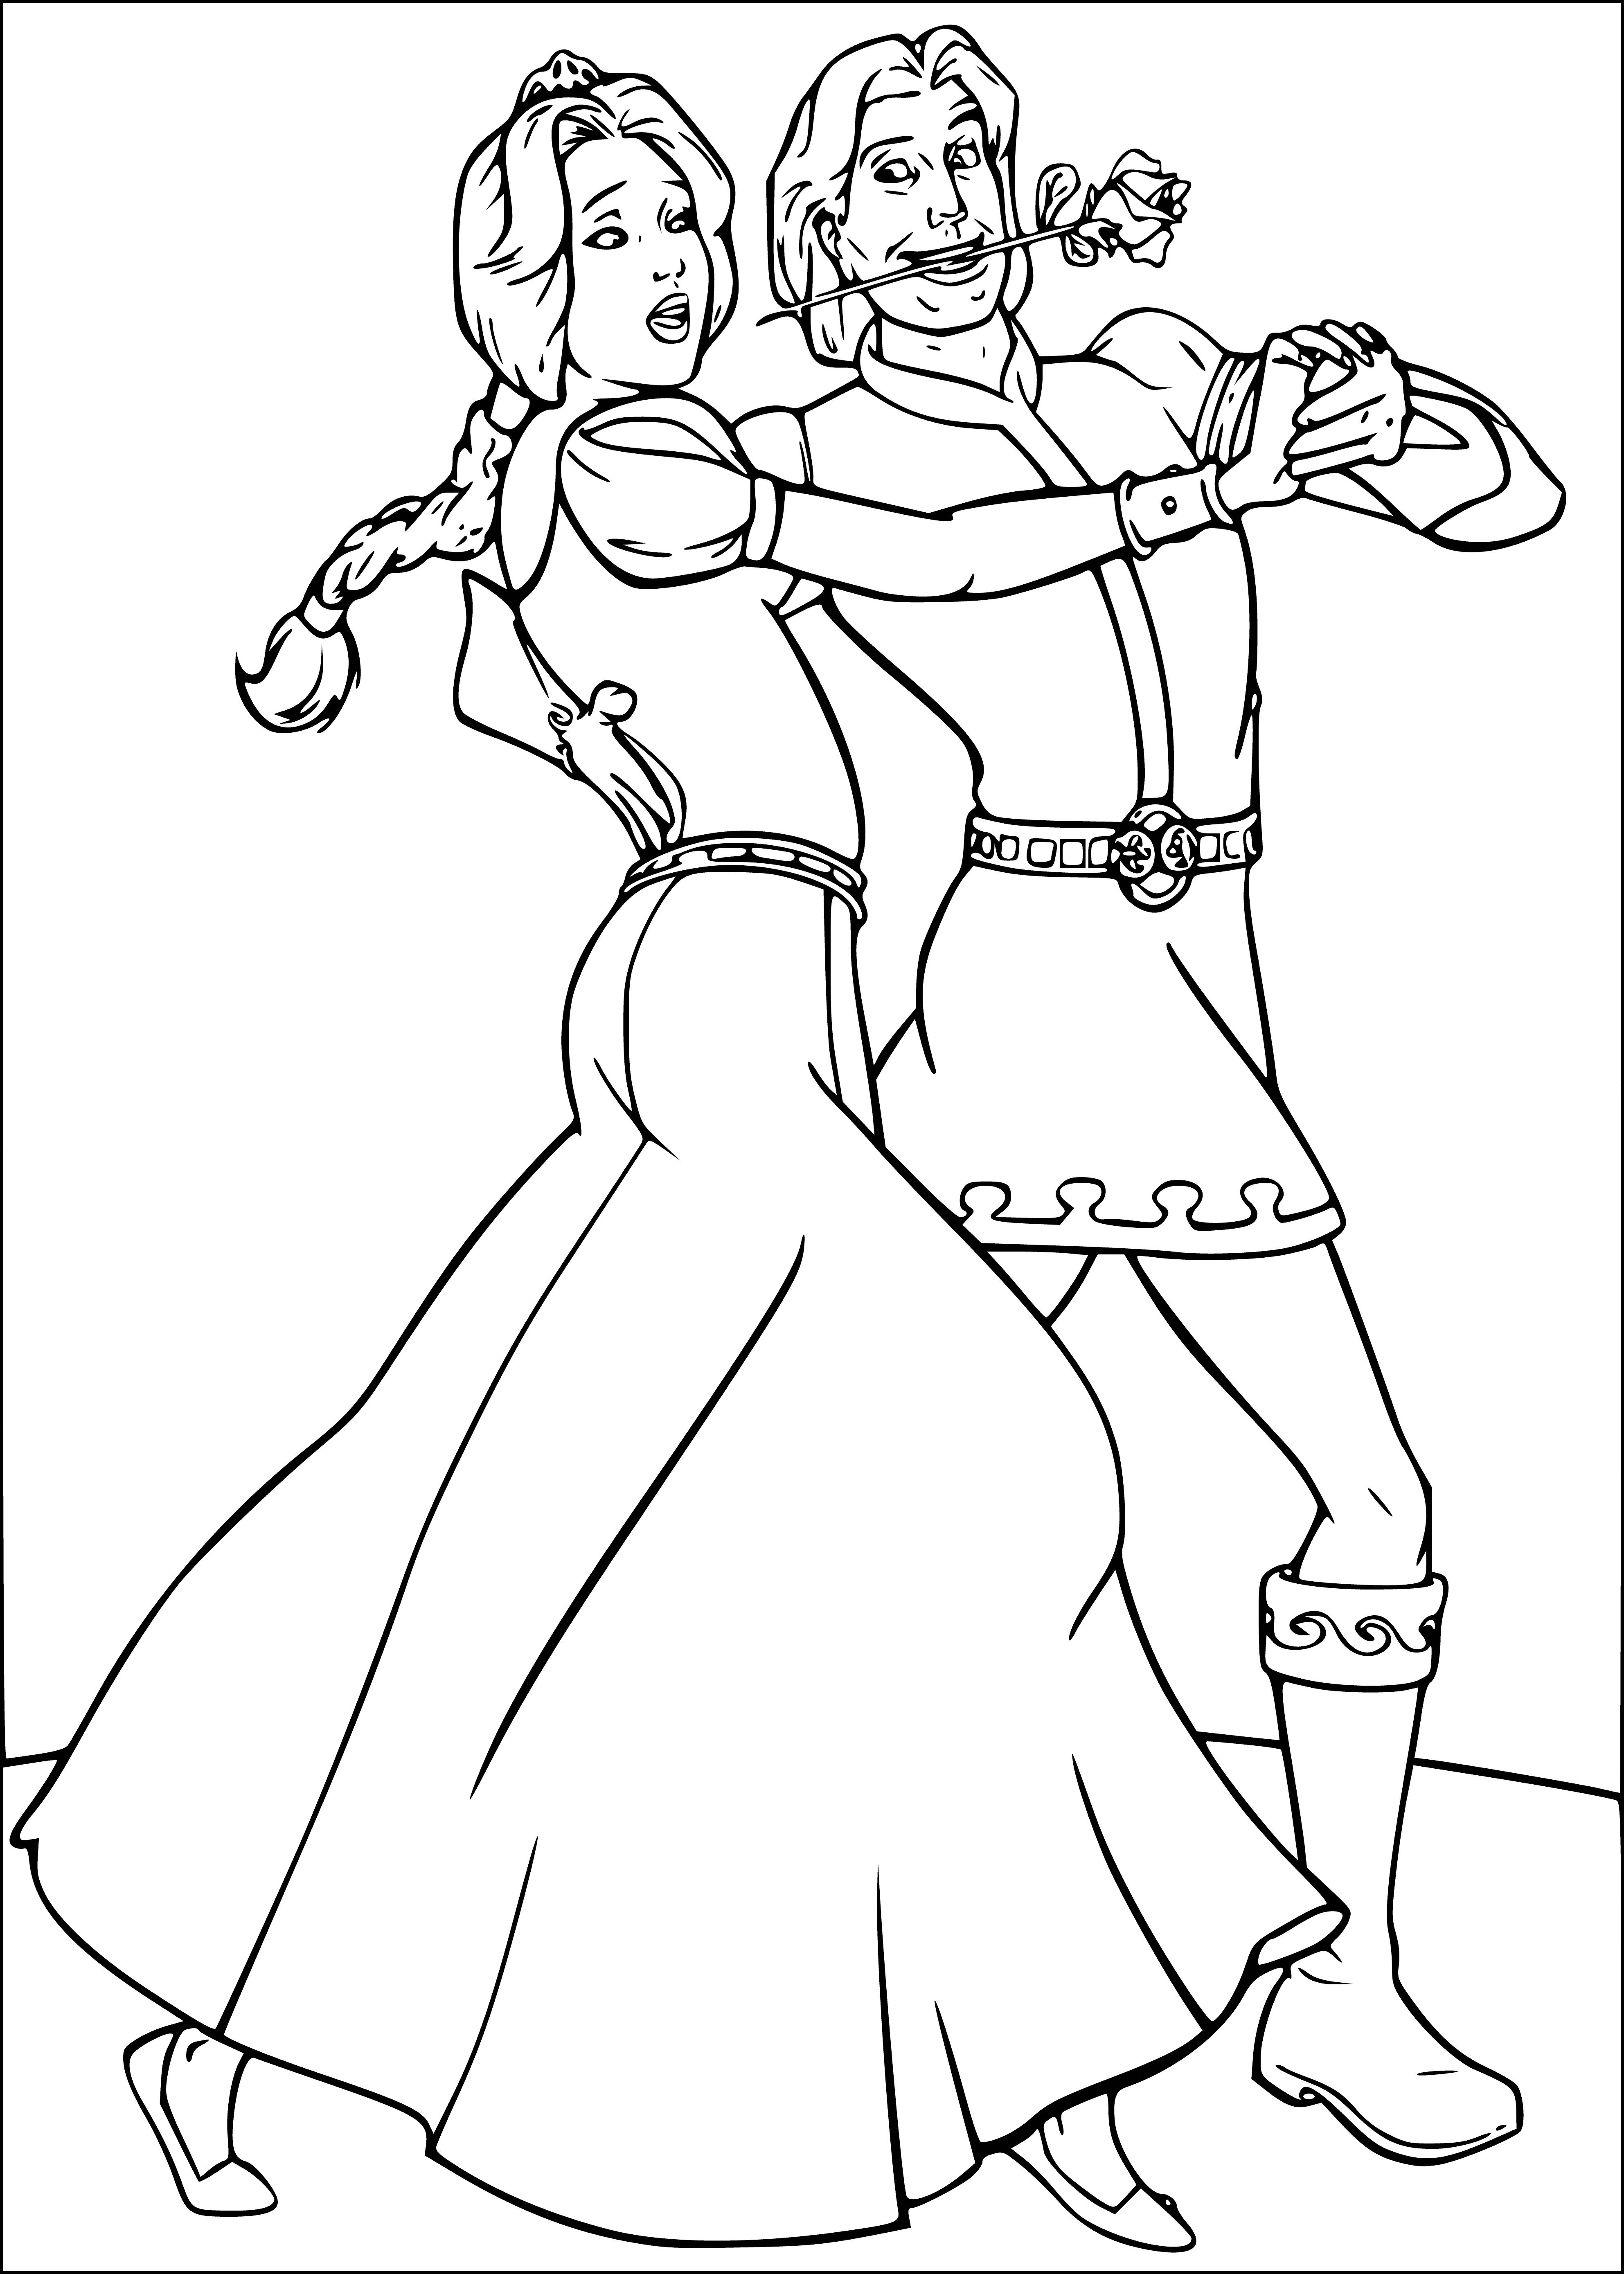 coloring page: Shrek the green ogre towers over scared human prince, shield and sword in hand, wearing purple cape and crown.